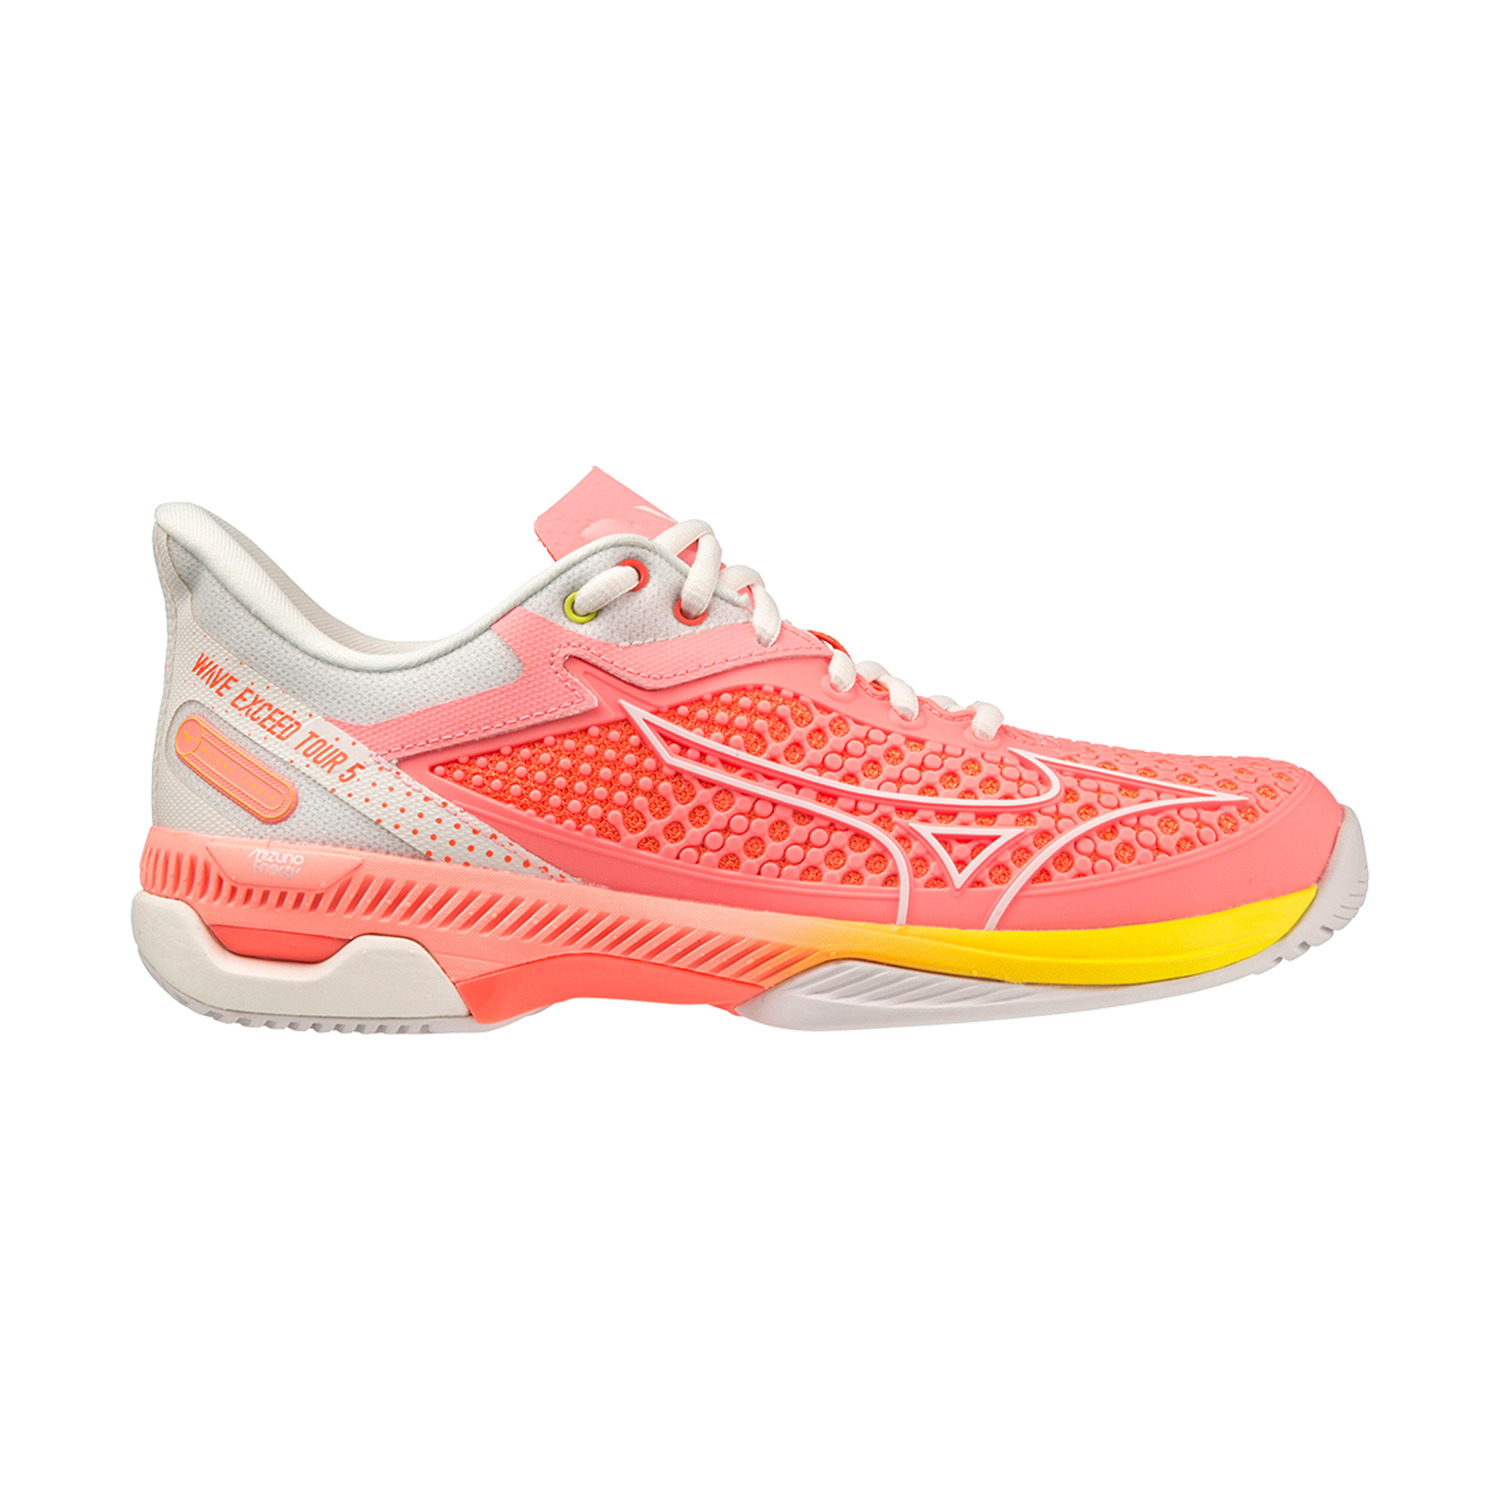 Mizuno Wave Exceed Tour 5 All Court - Candy Coral/Snow White/Neon Flame